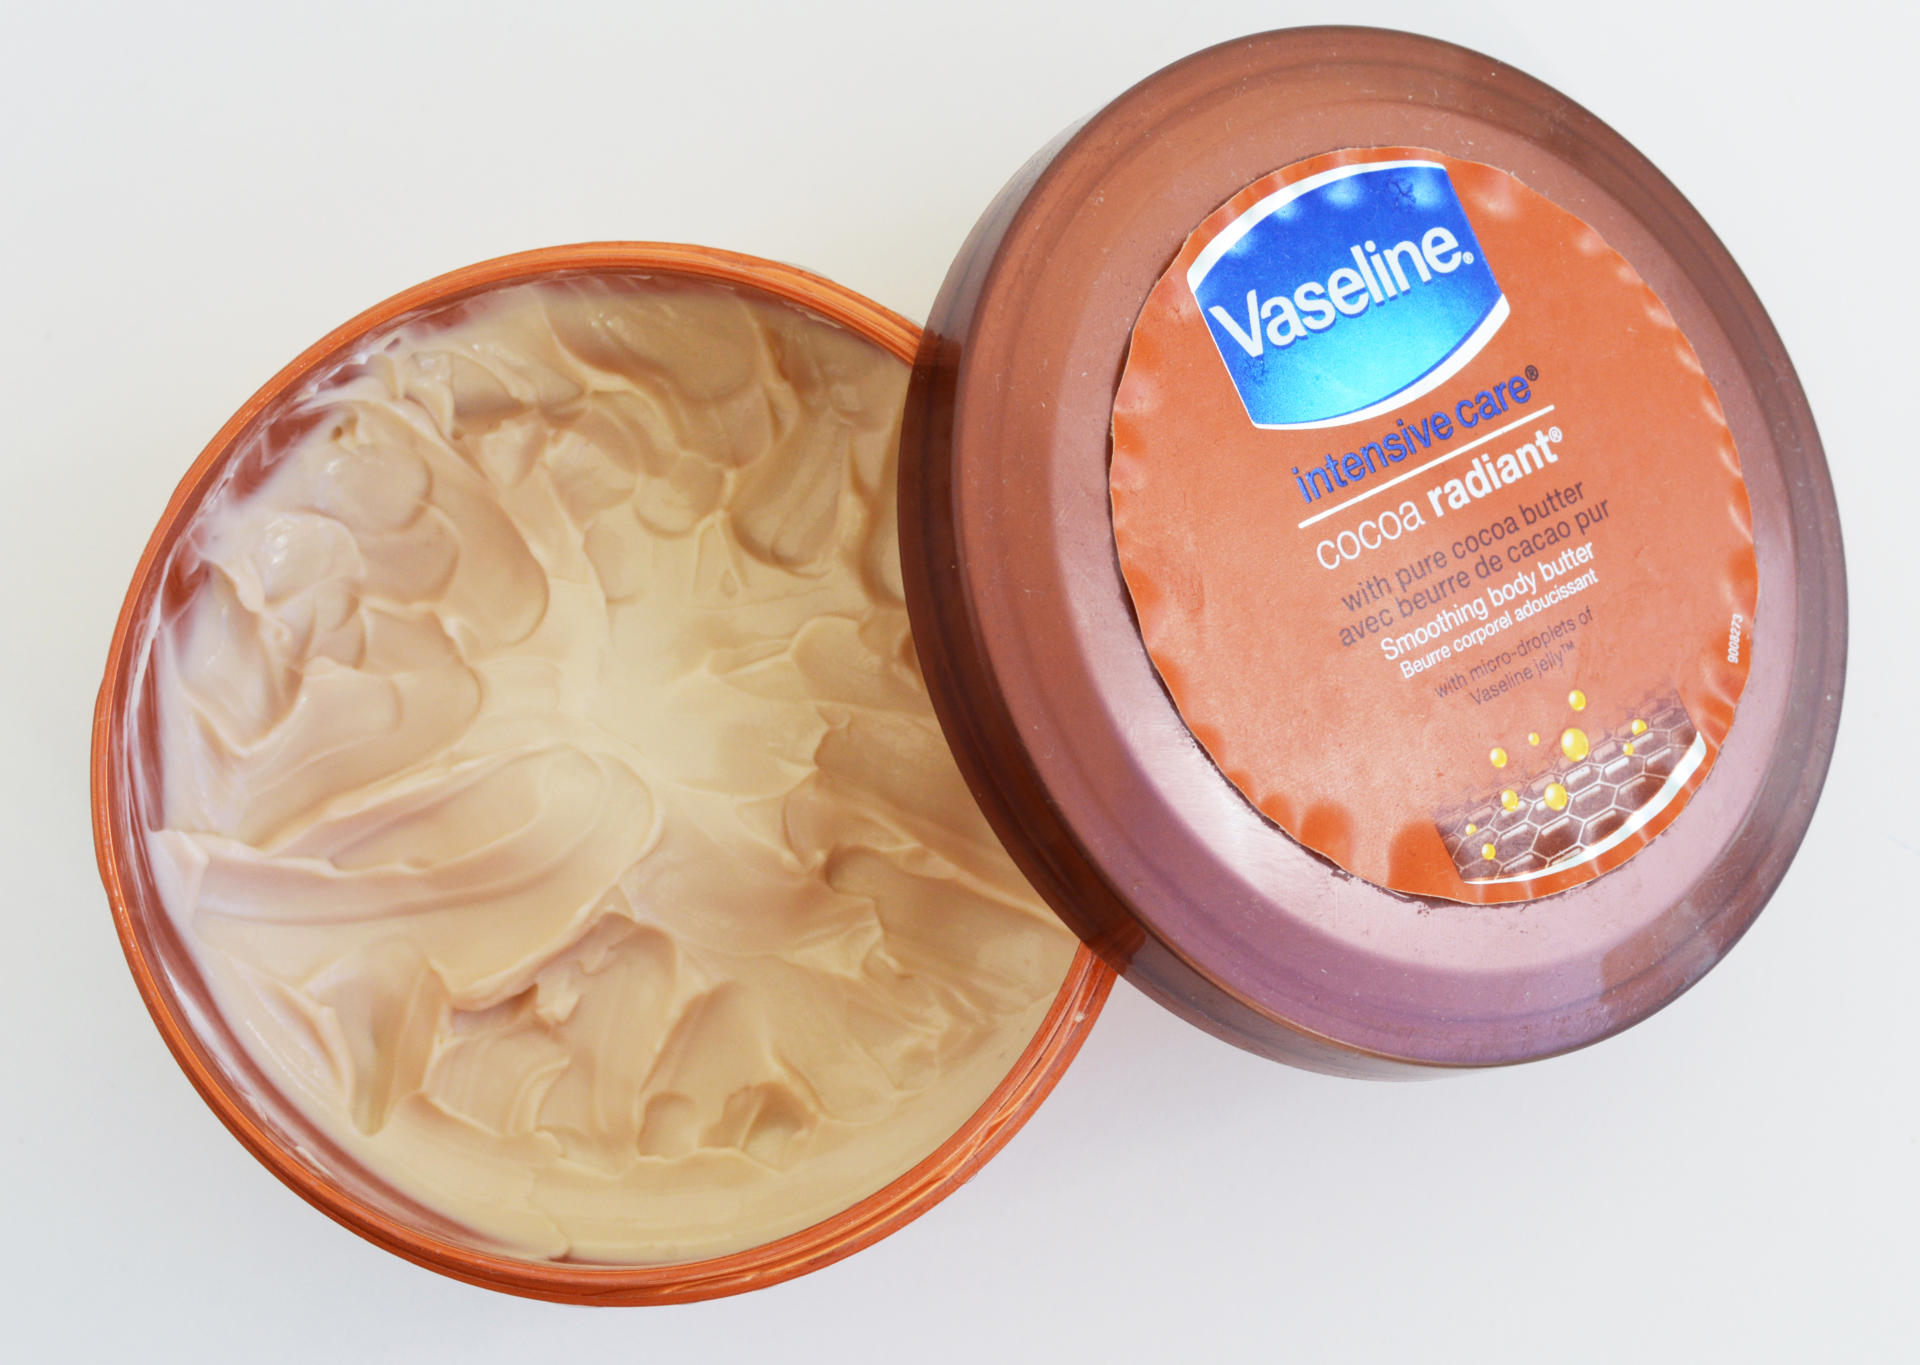 Vaseline Cocoa Radiant Smoothing Body Butter